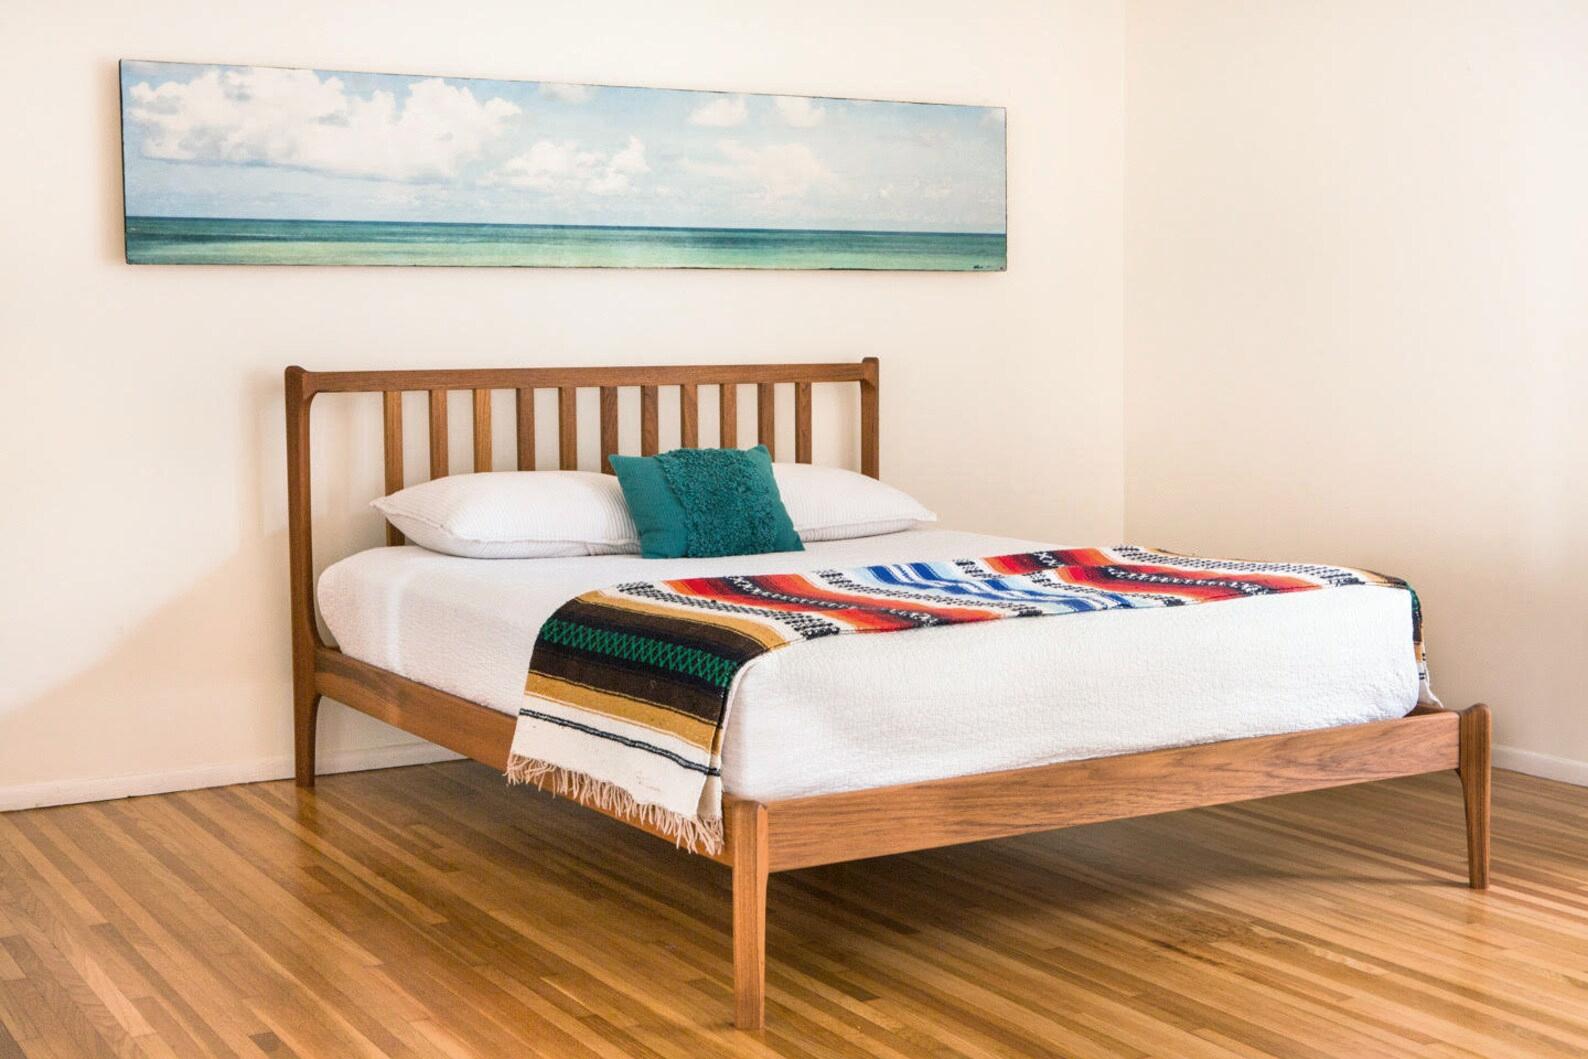 This King bed is a new take on the flagship Deeble bed design. All basic details, such as joinery, assembly, dimensions etc. are the same as the classic modern bed but this version features a slatted headboard. The slats run down to the head rail,